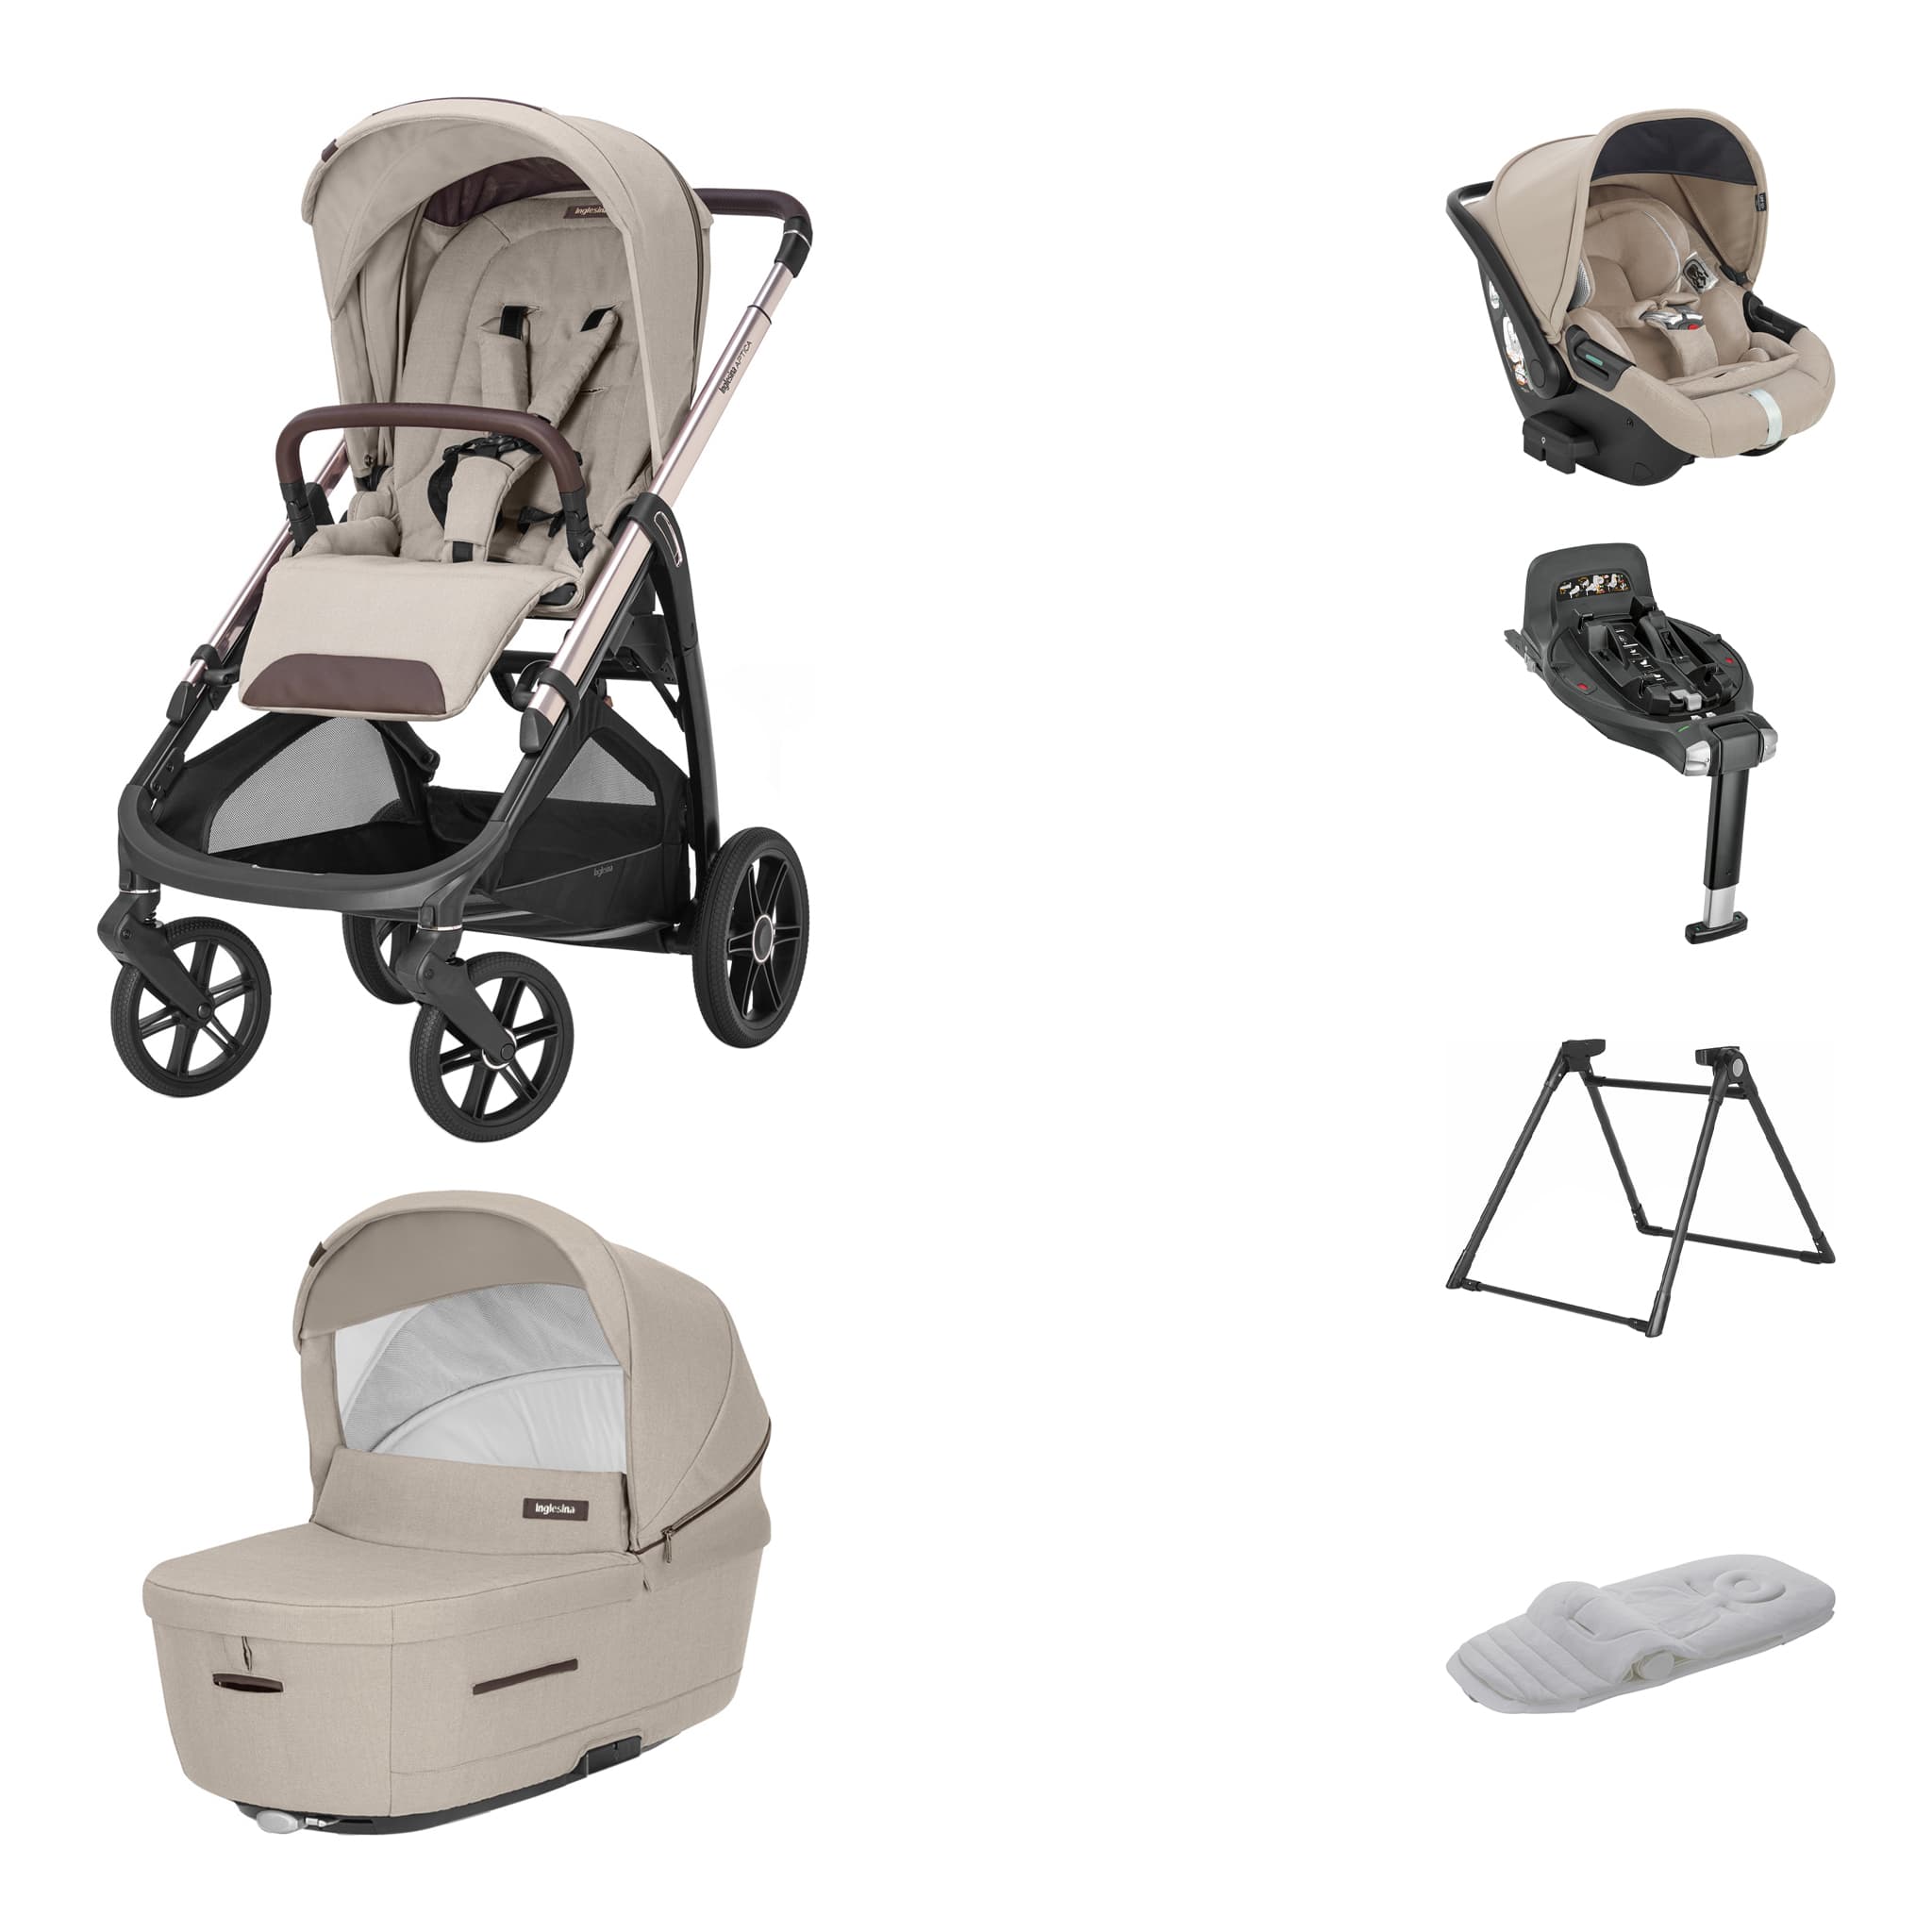 Inglesina Aptica 3 in 1 Travel System with ISOFIX Base & Carrycot Stand -  Pashmina Beige